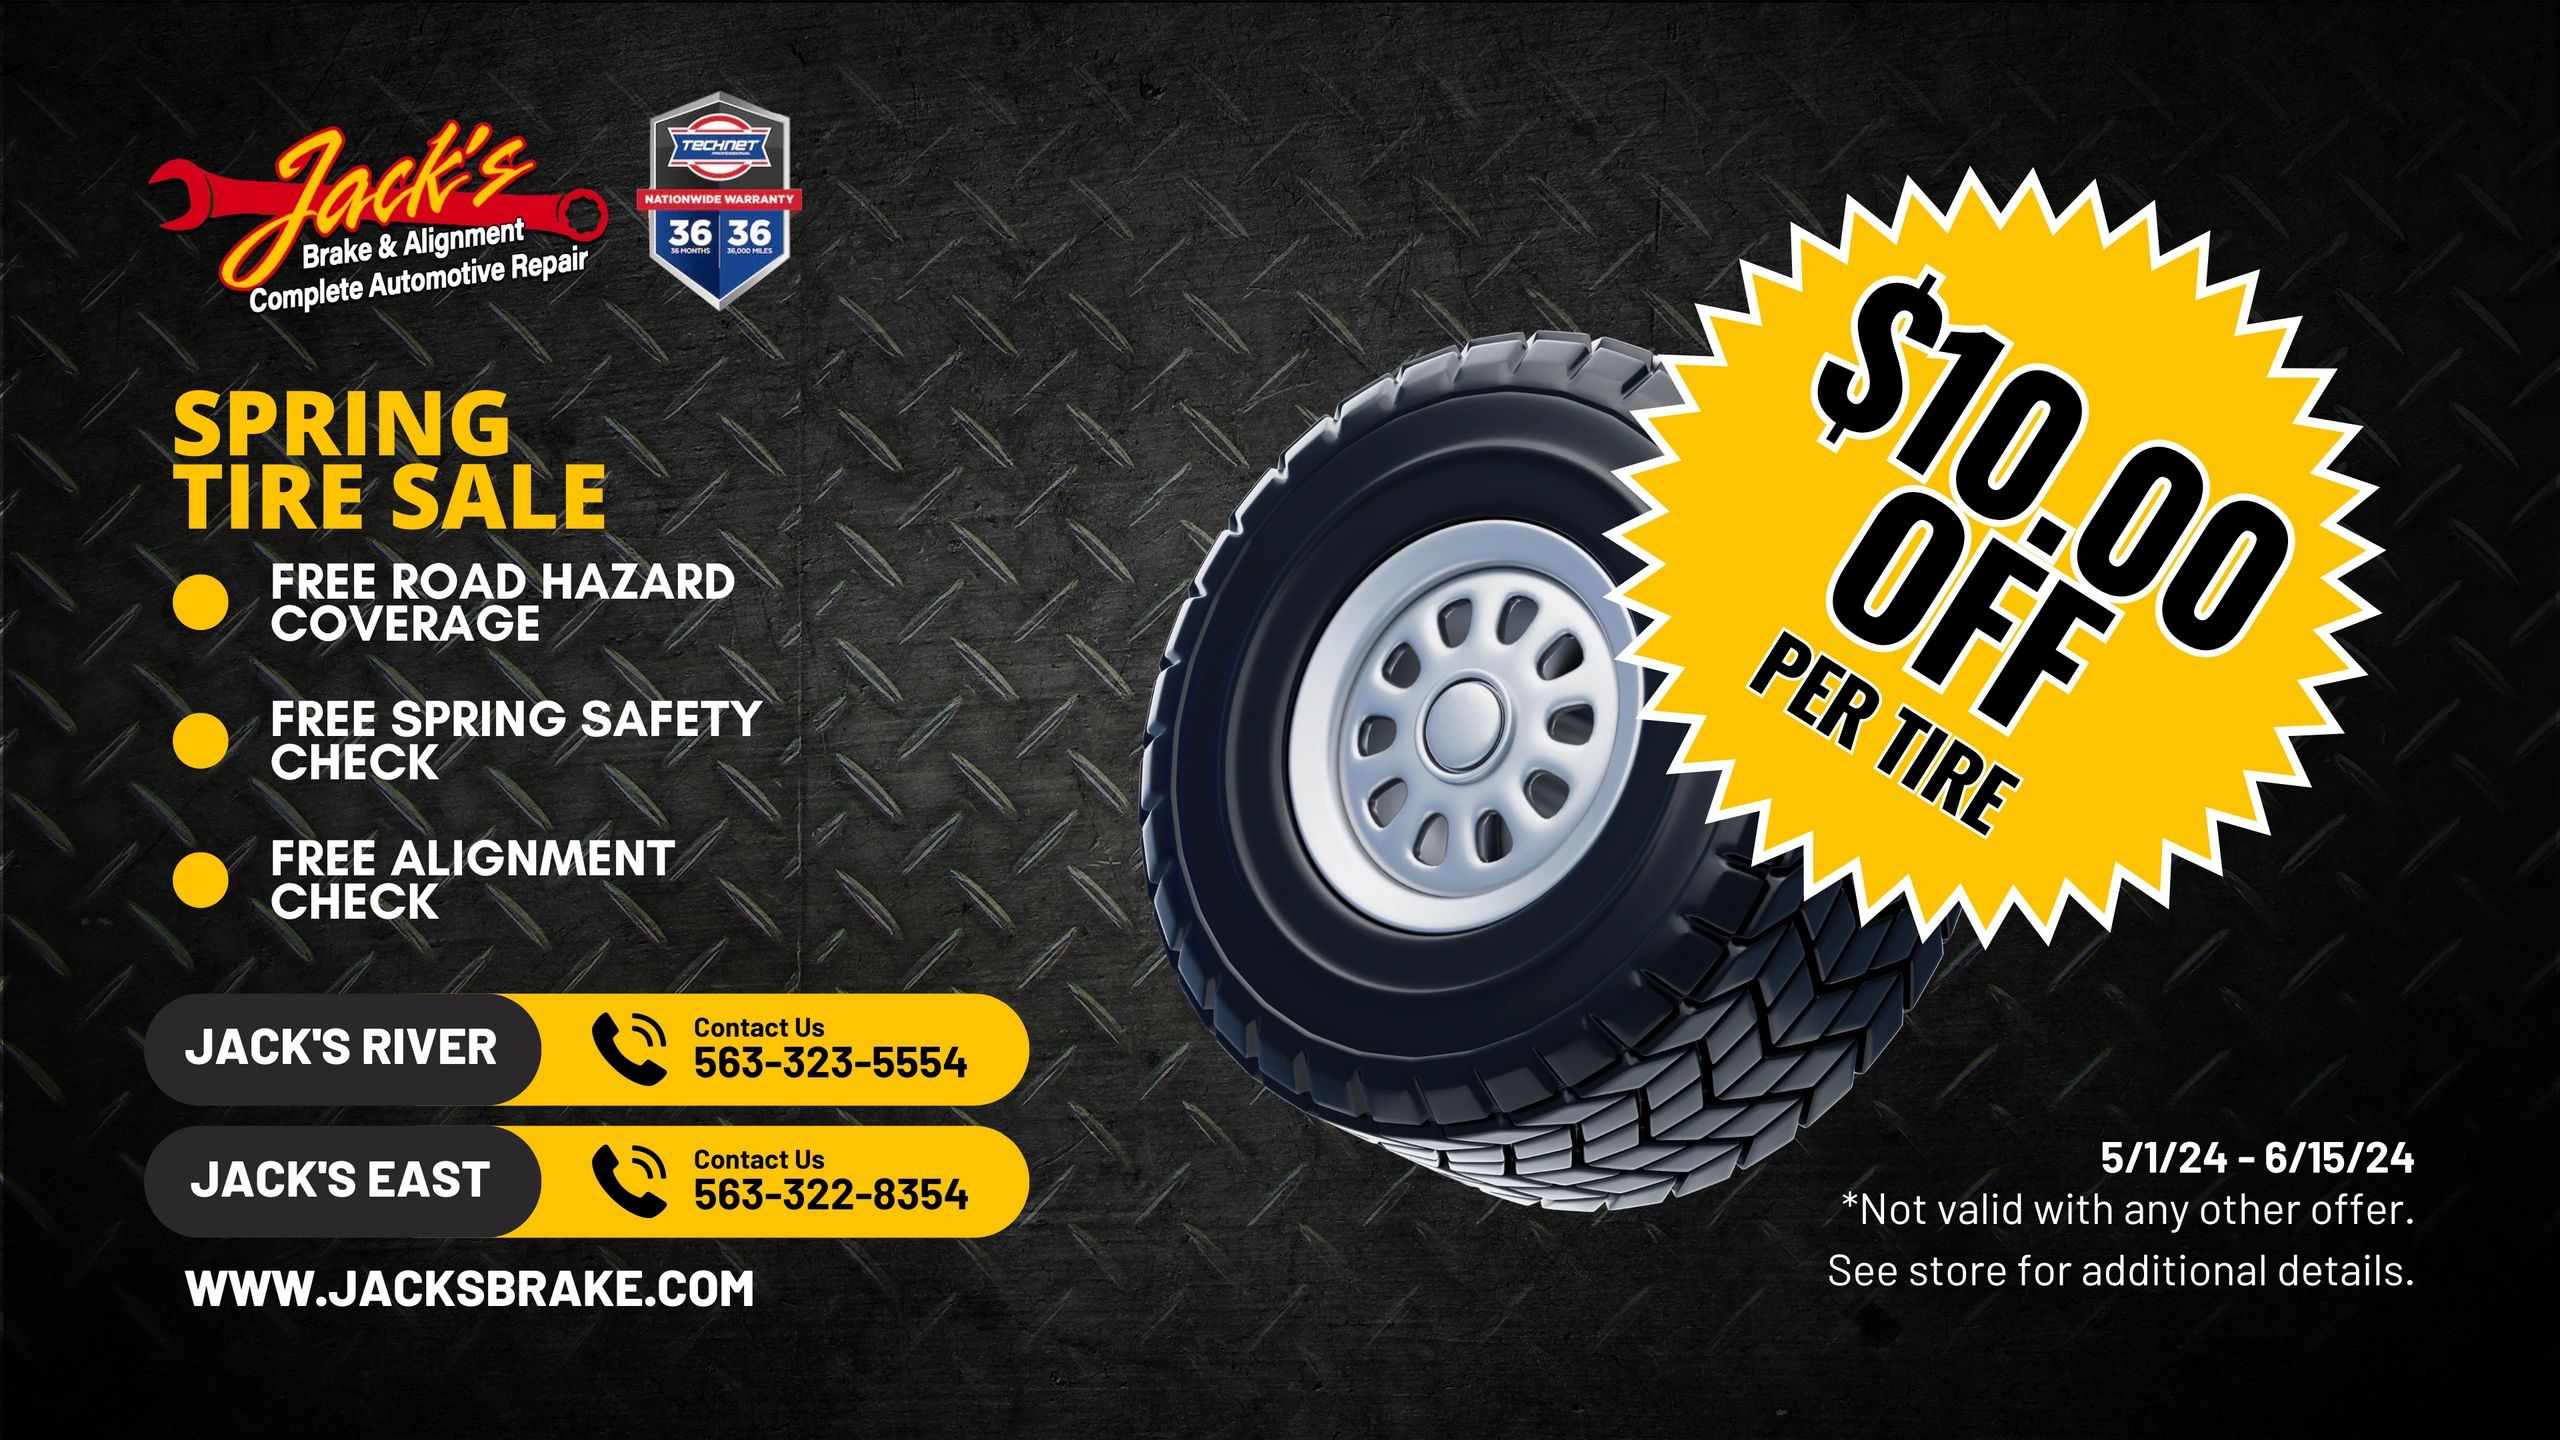 cheap tires, huge savings on tires, cheap tires at Jack's Brake, cheap tires in davenport iowa